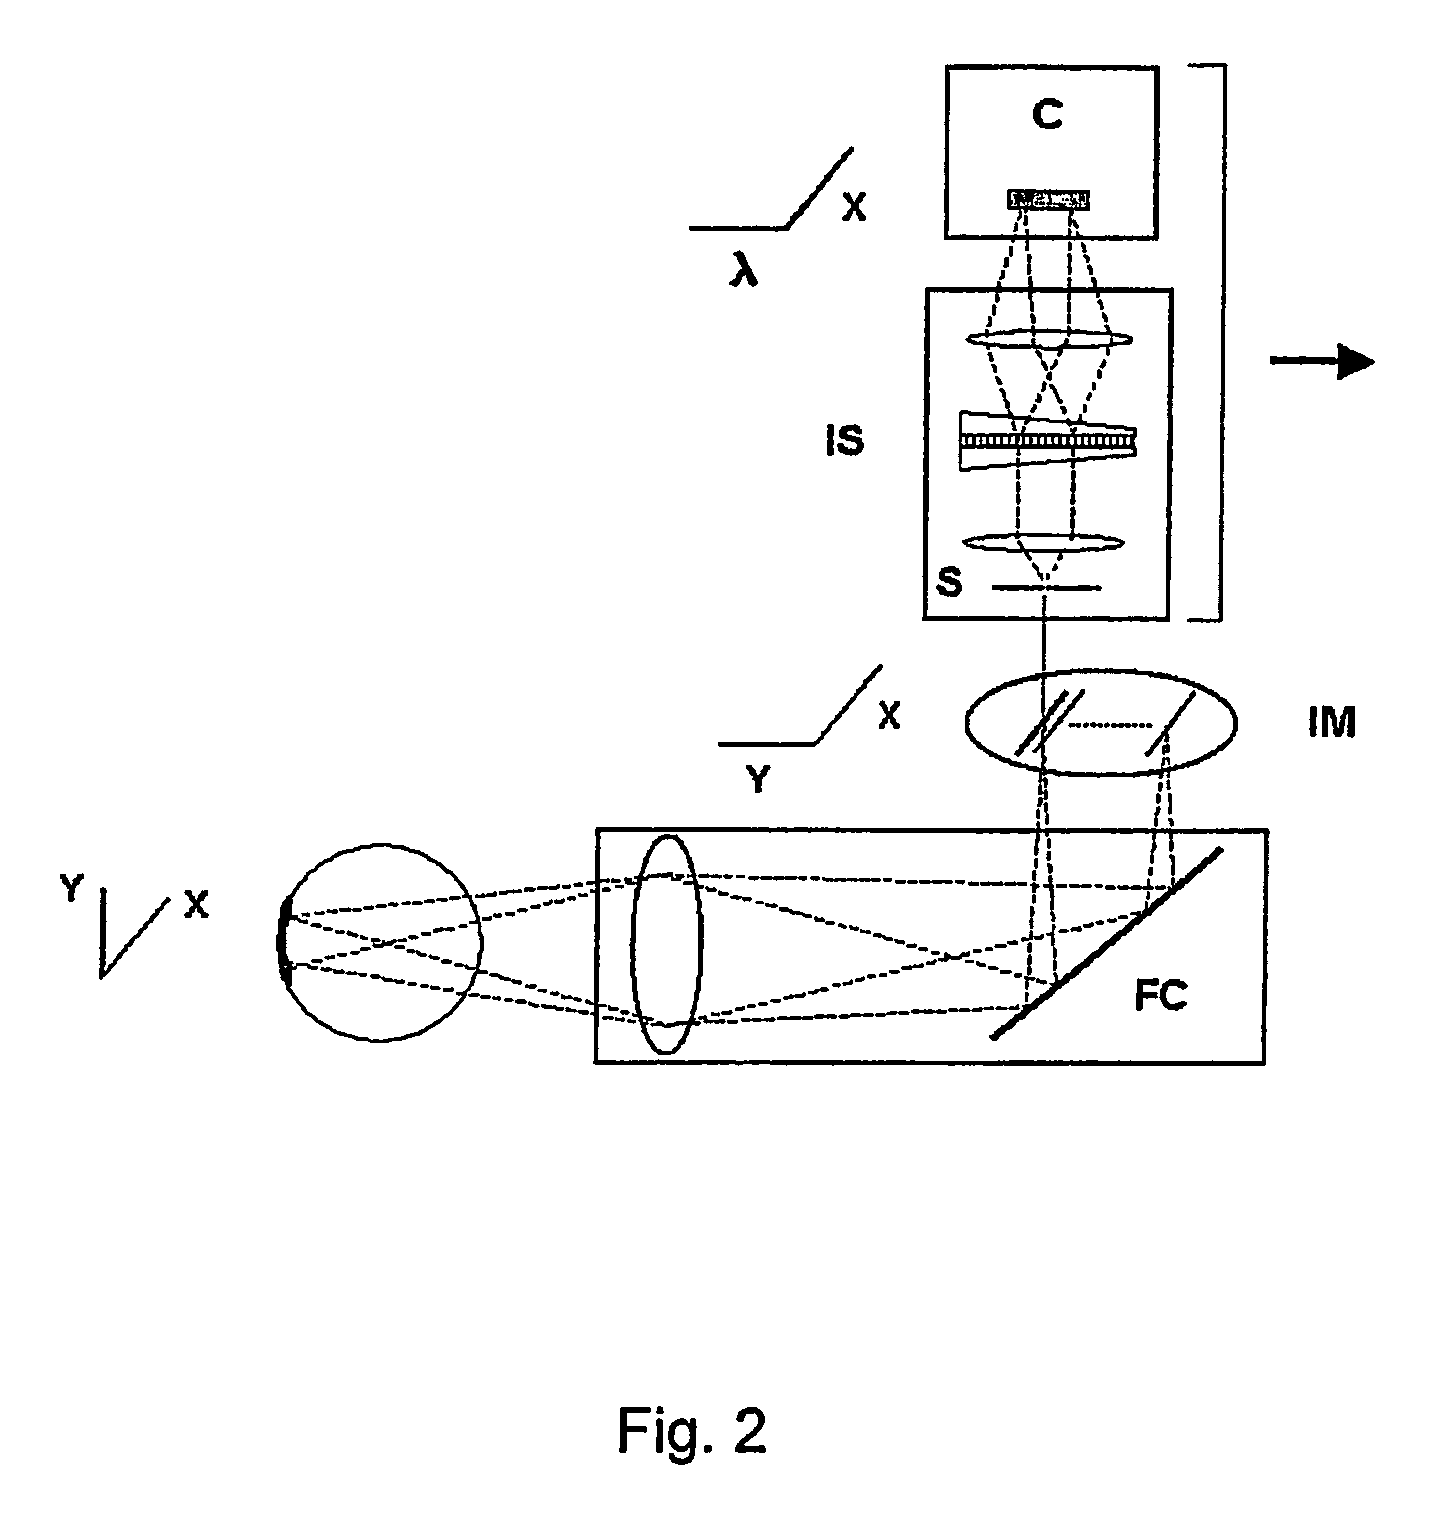 Method for evaluating relative oxygen saturation in body tissues